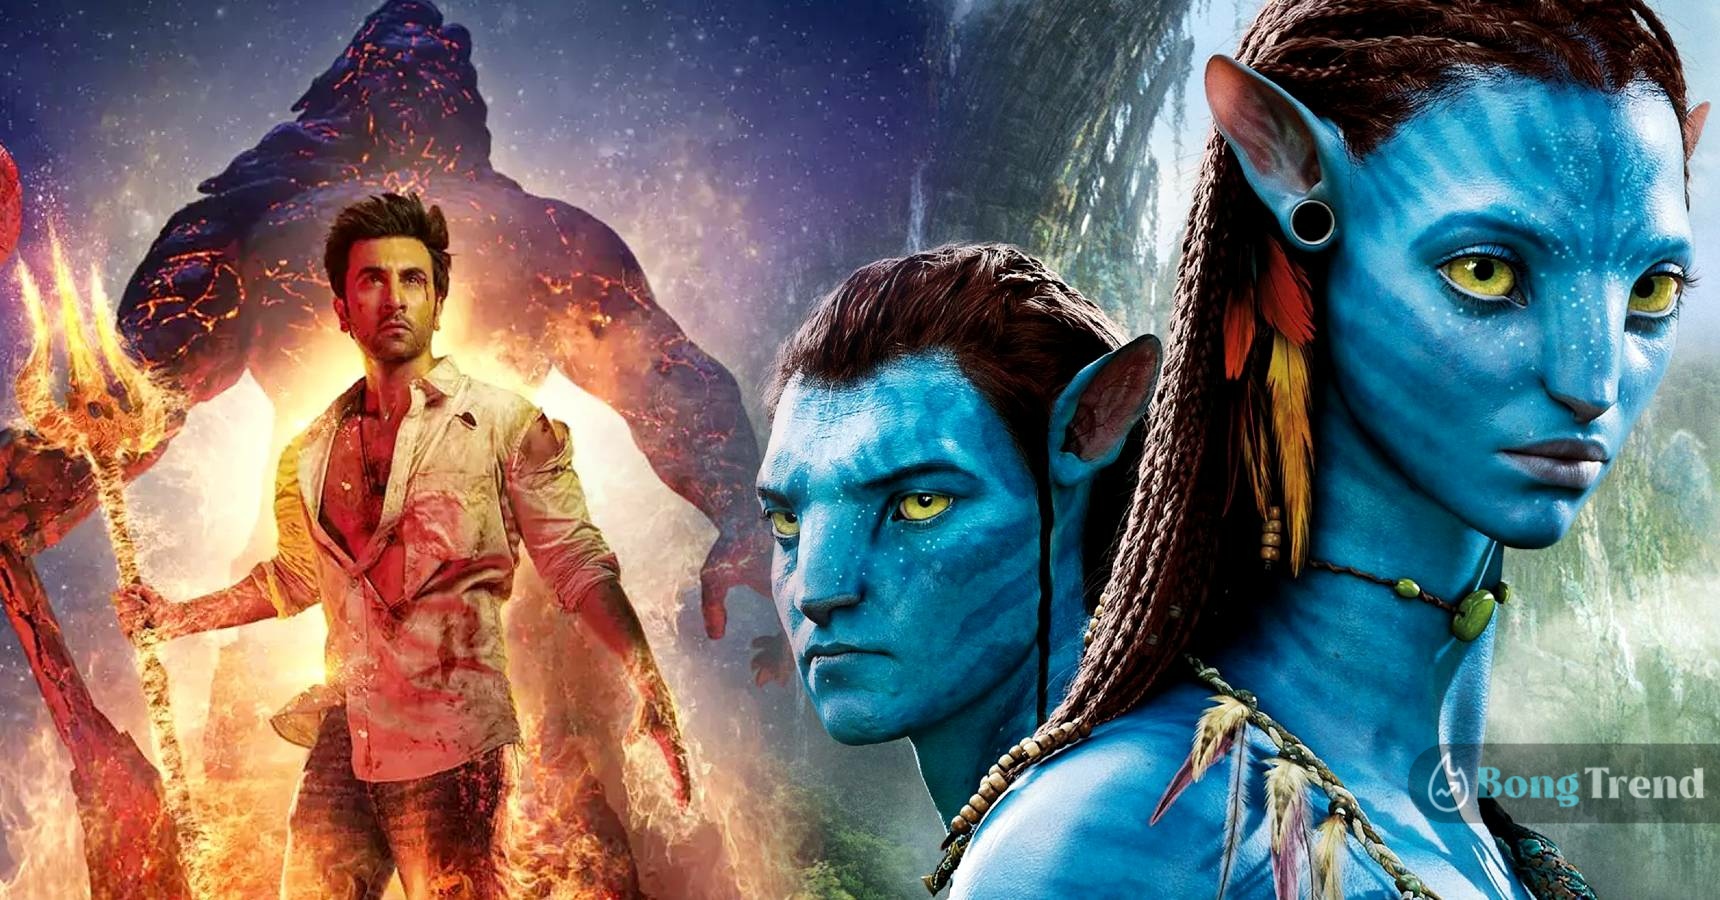 These 6 big budget Indian movies is going to release along with 1800 crore Avatar